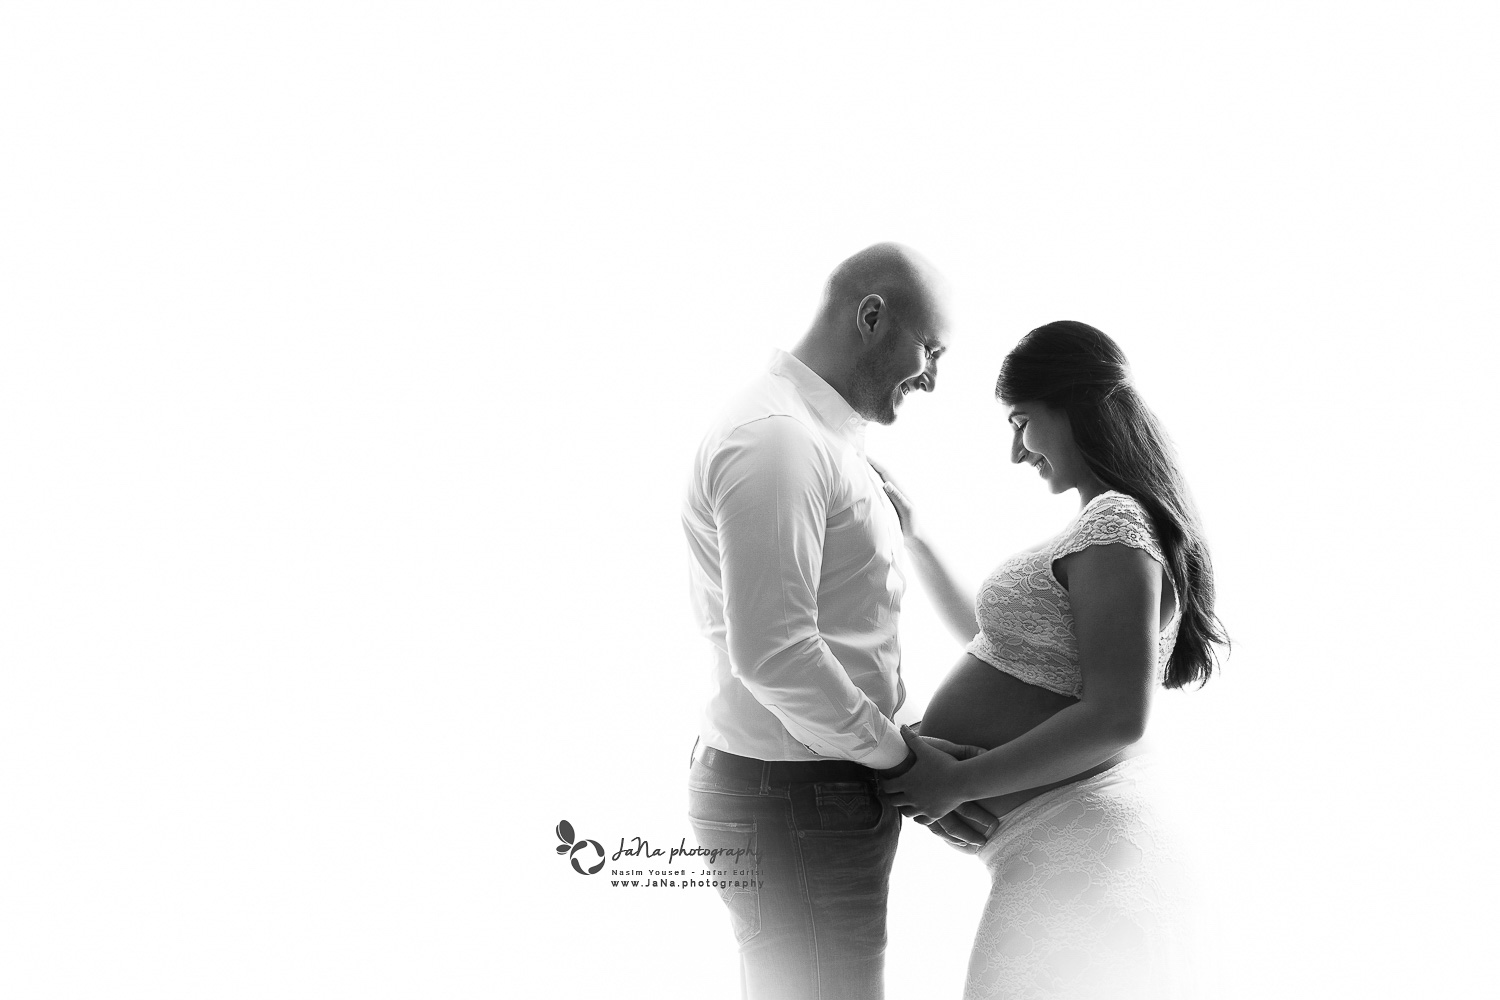 Vancouver maternity and newborn photography | Bowen